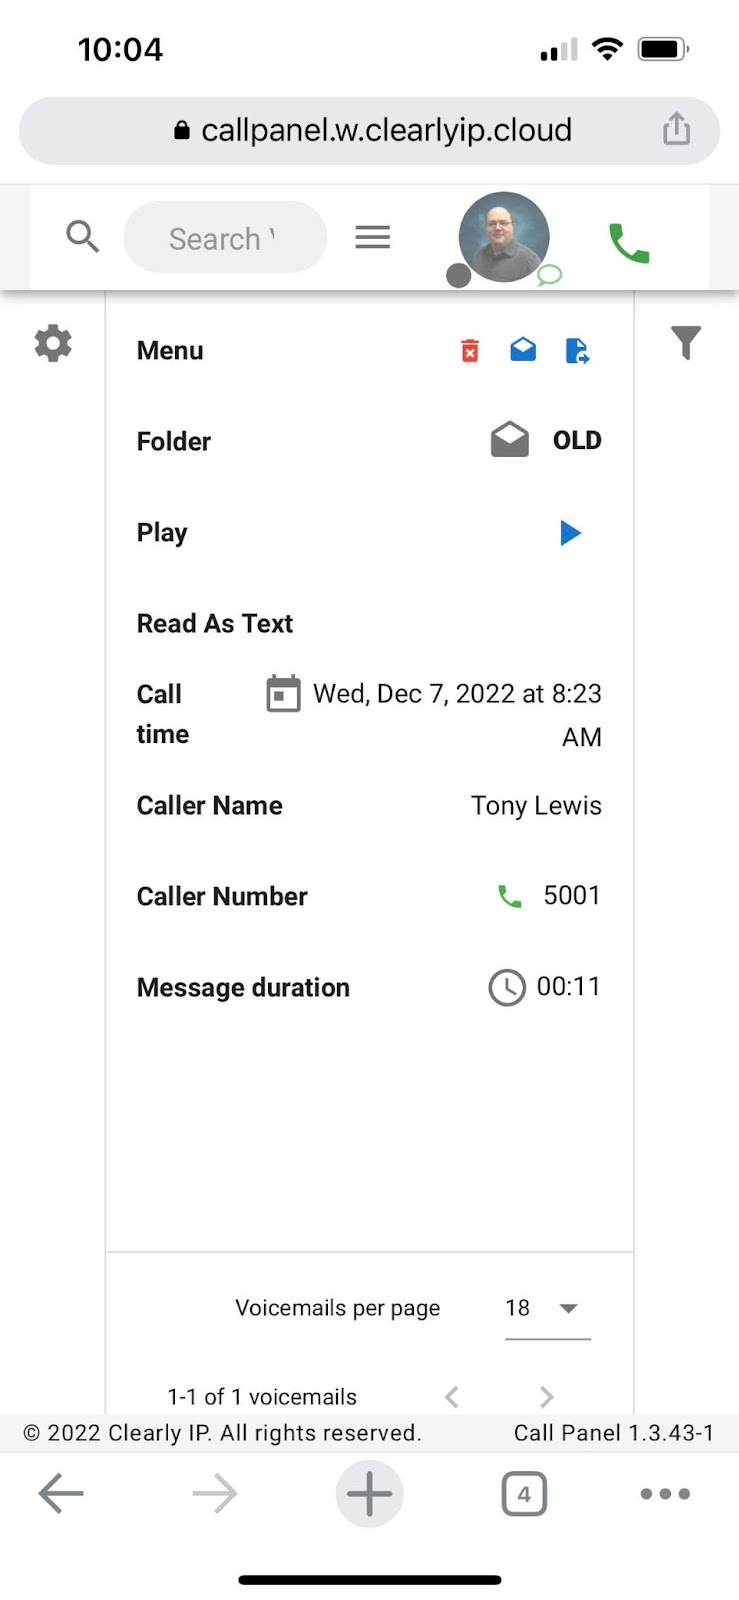 The Voicemail Tab of Call Panel is now Mobile Friendly-Clearly Cloud